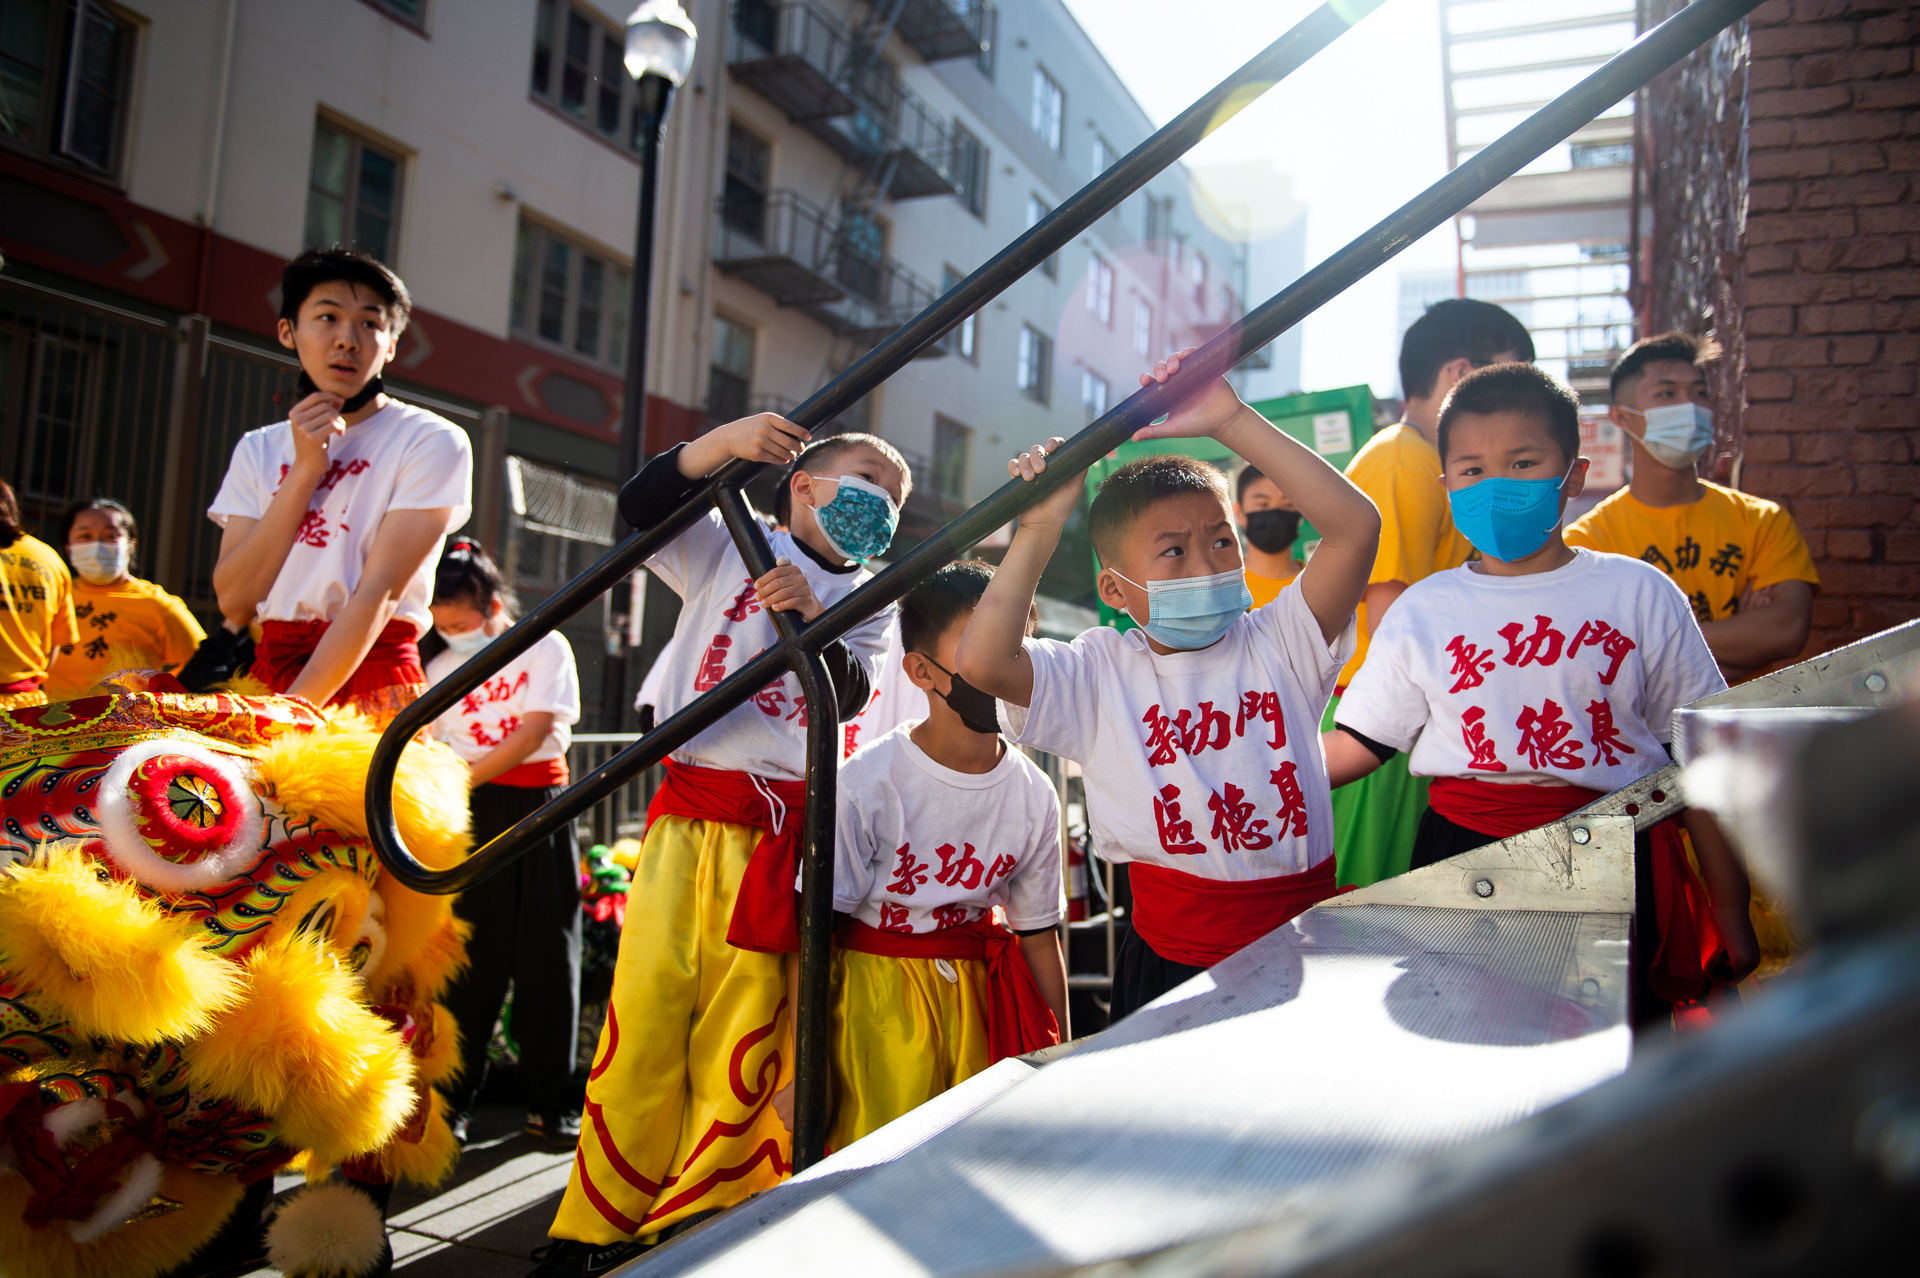 young children wearing white Yau Kung Moon shirts and gold leggings with red sashes hold onto a railing while looking toward an outdoor stage